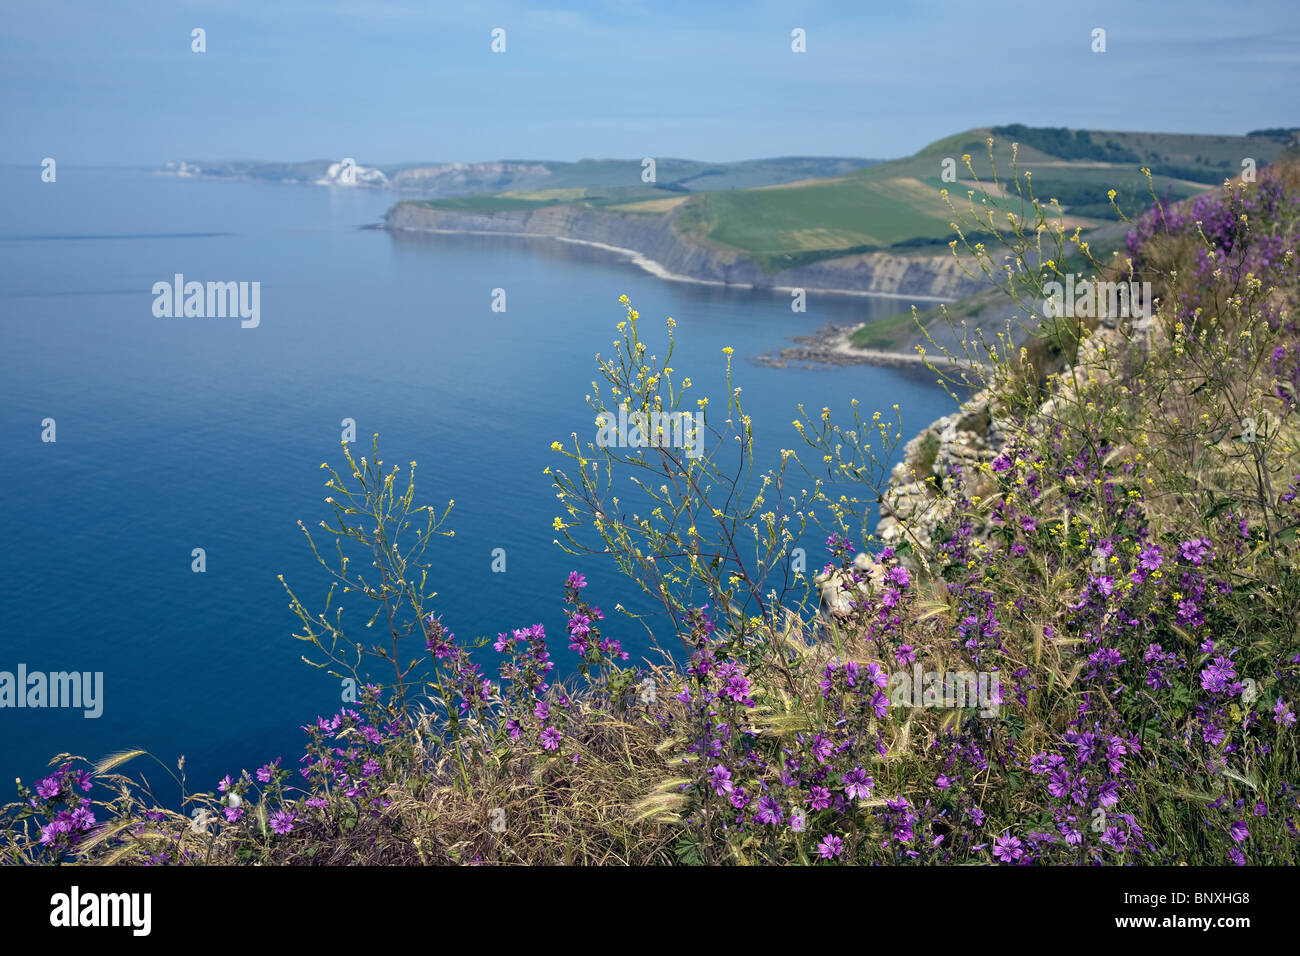 jurassic coast view from purbeck hills Stock Photo